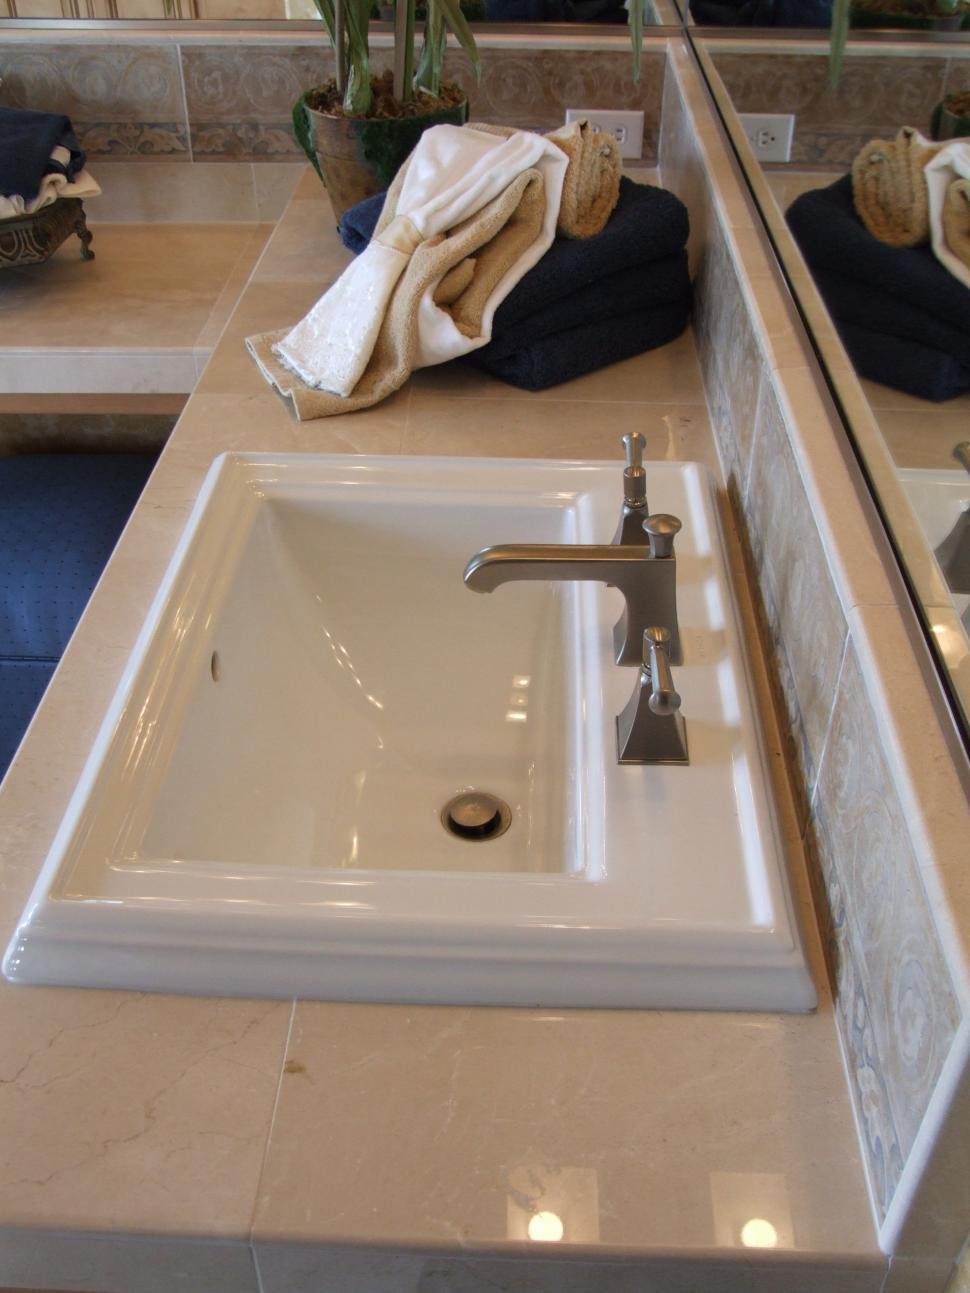 Free Image of Sinks and Bathrooms 